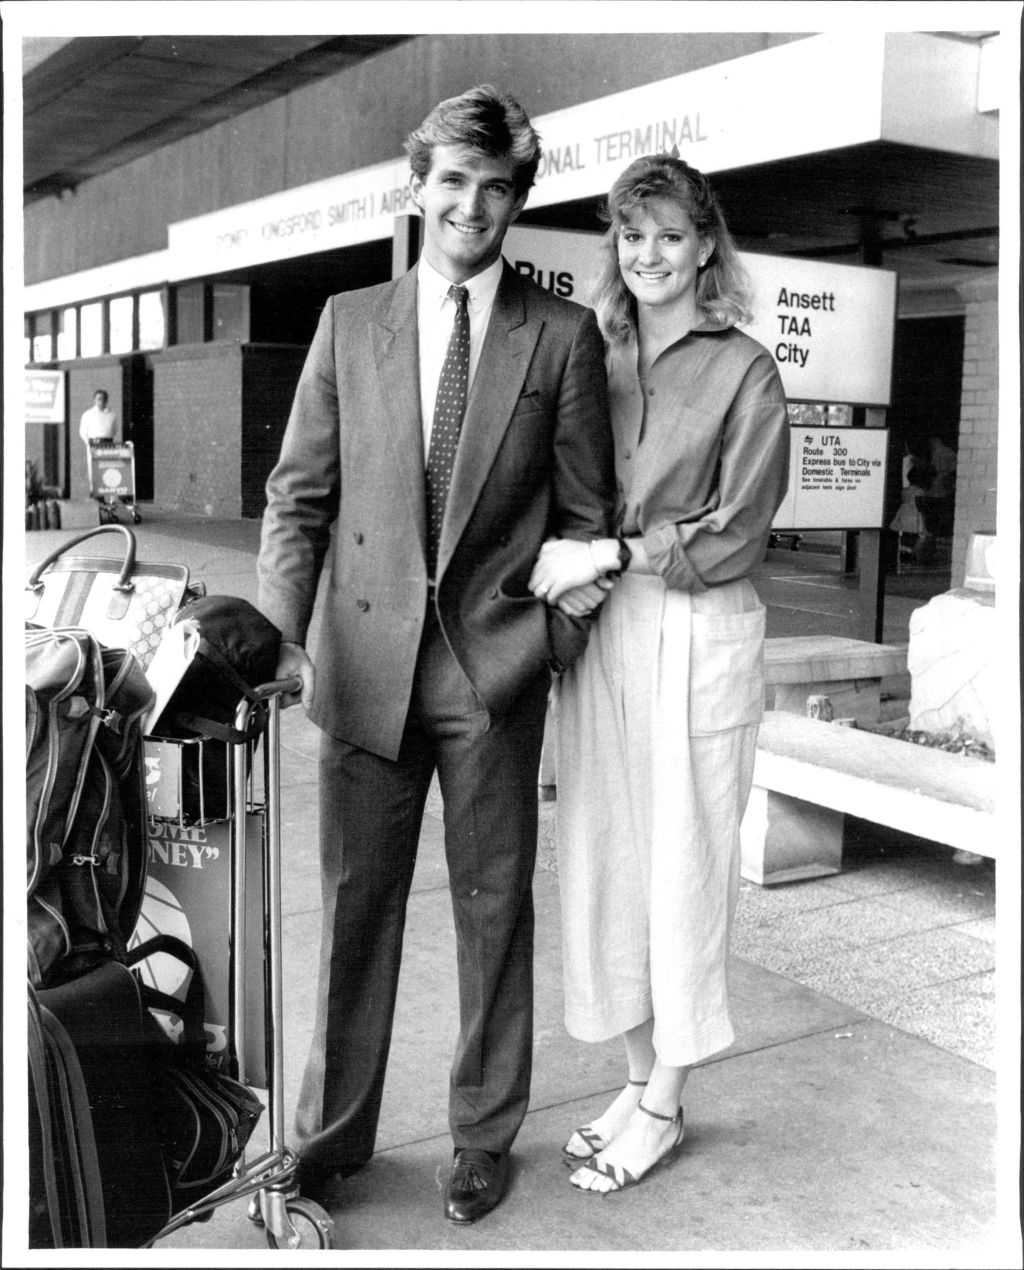 Australia's Bronze Medal winner Mark Kerry and his wife Lynda, pictured in 1984 after they returned to Sydney from the LA Olympic Games.  Photo: Antony Matheus Linsen